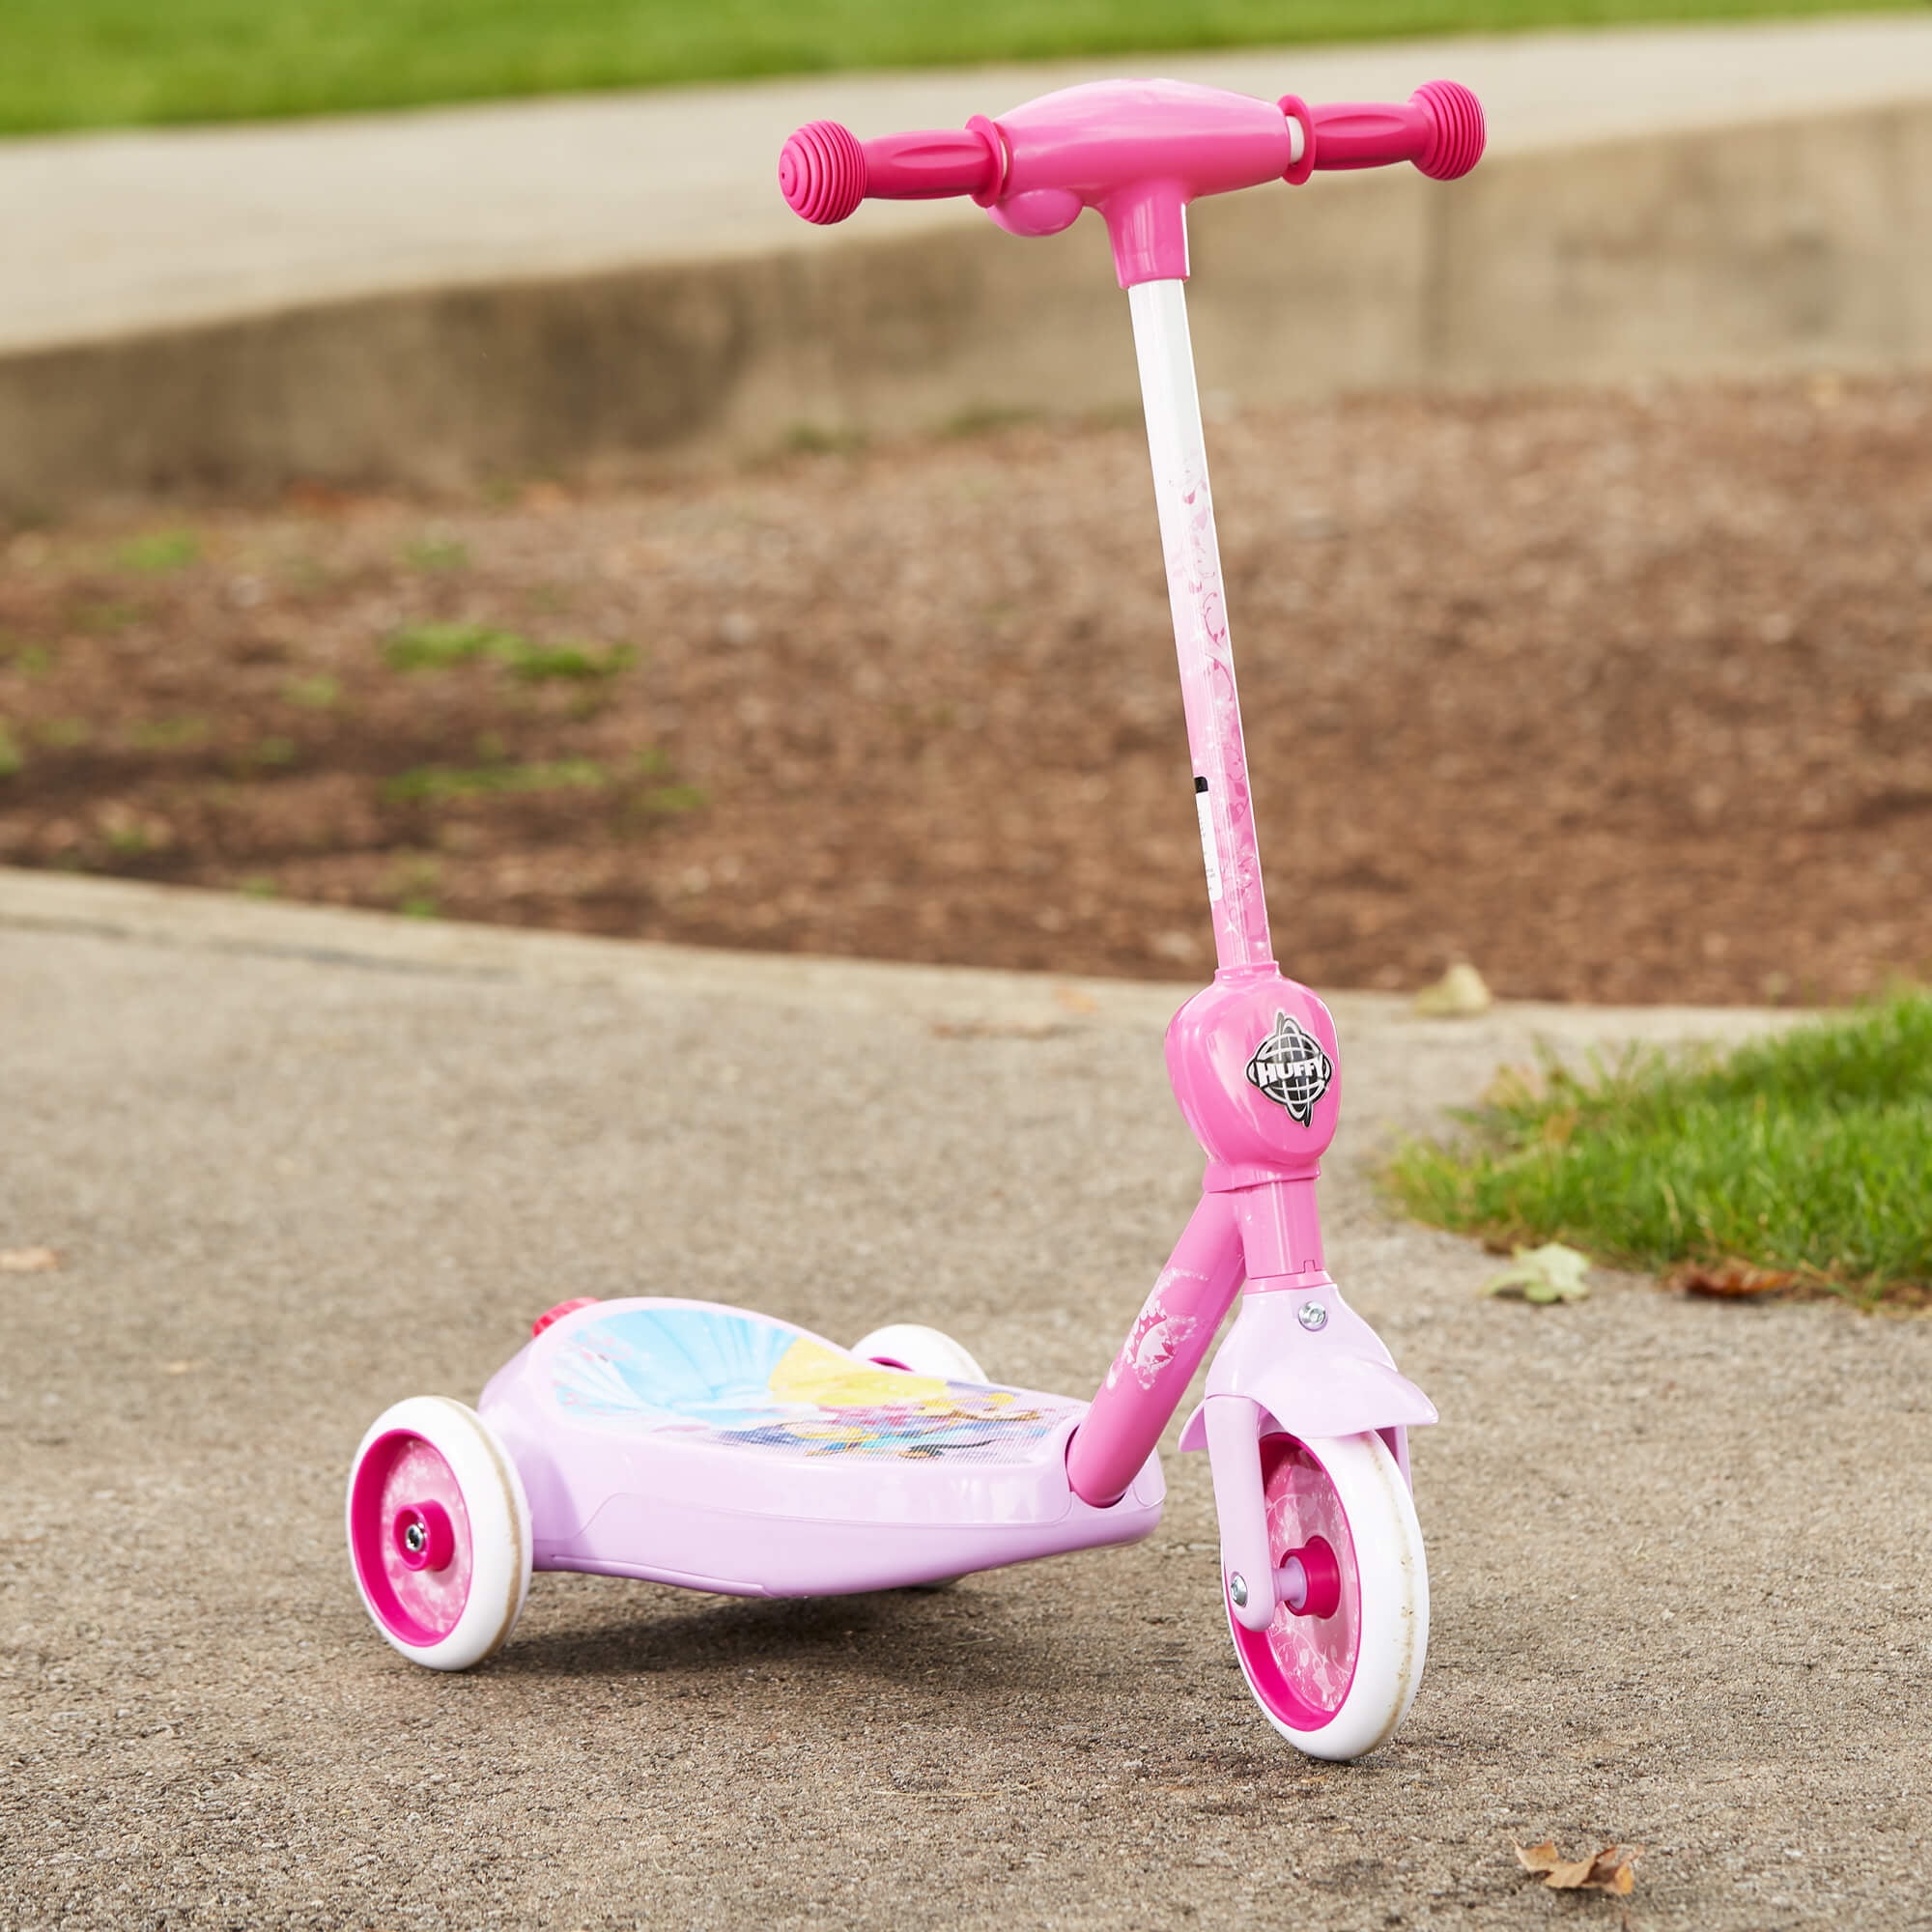 Disney Princess Girls’ 6V Electric 3-Wheel Bubble Scooter by Huffy 